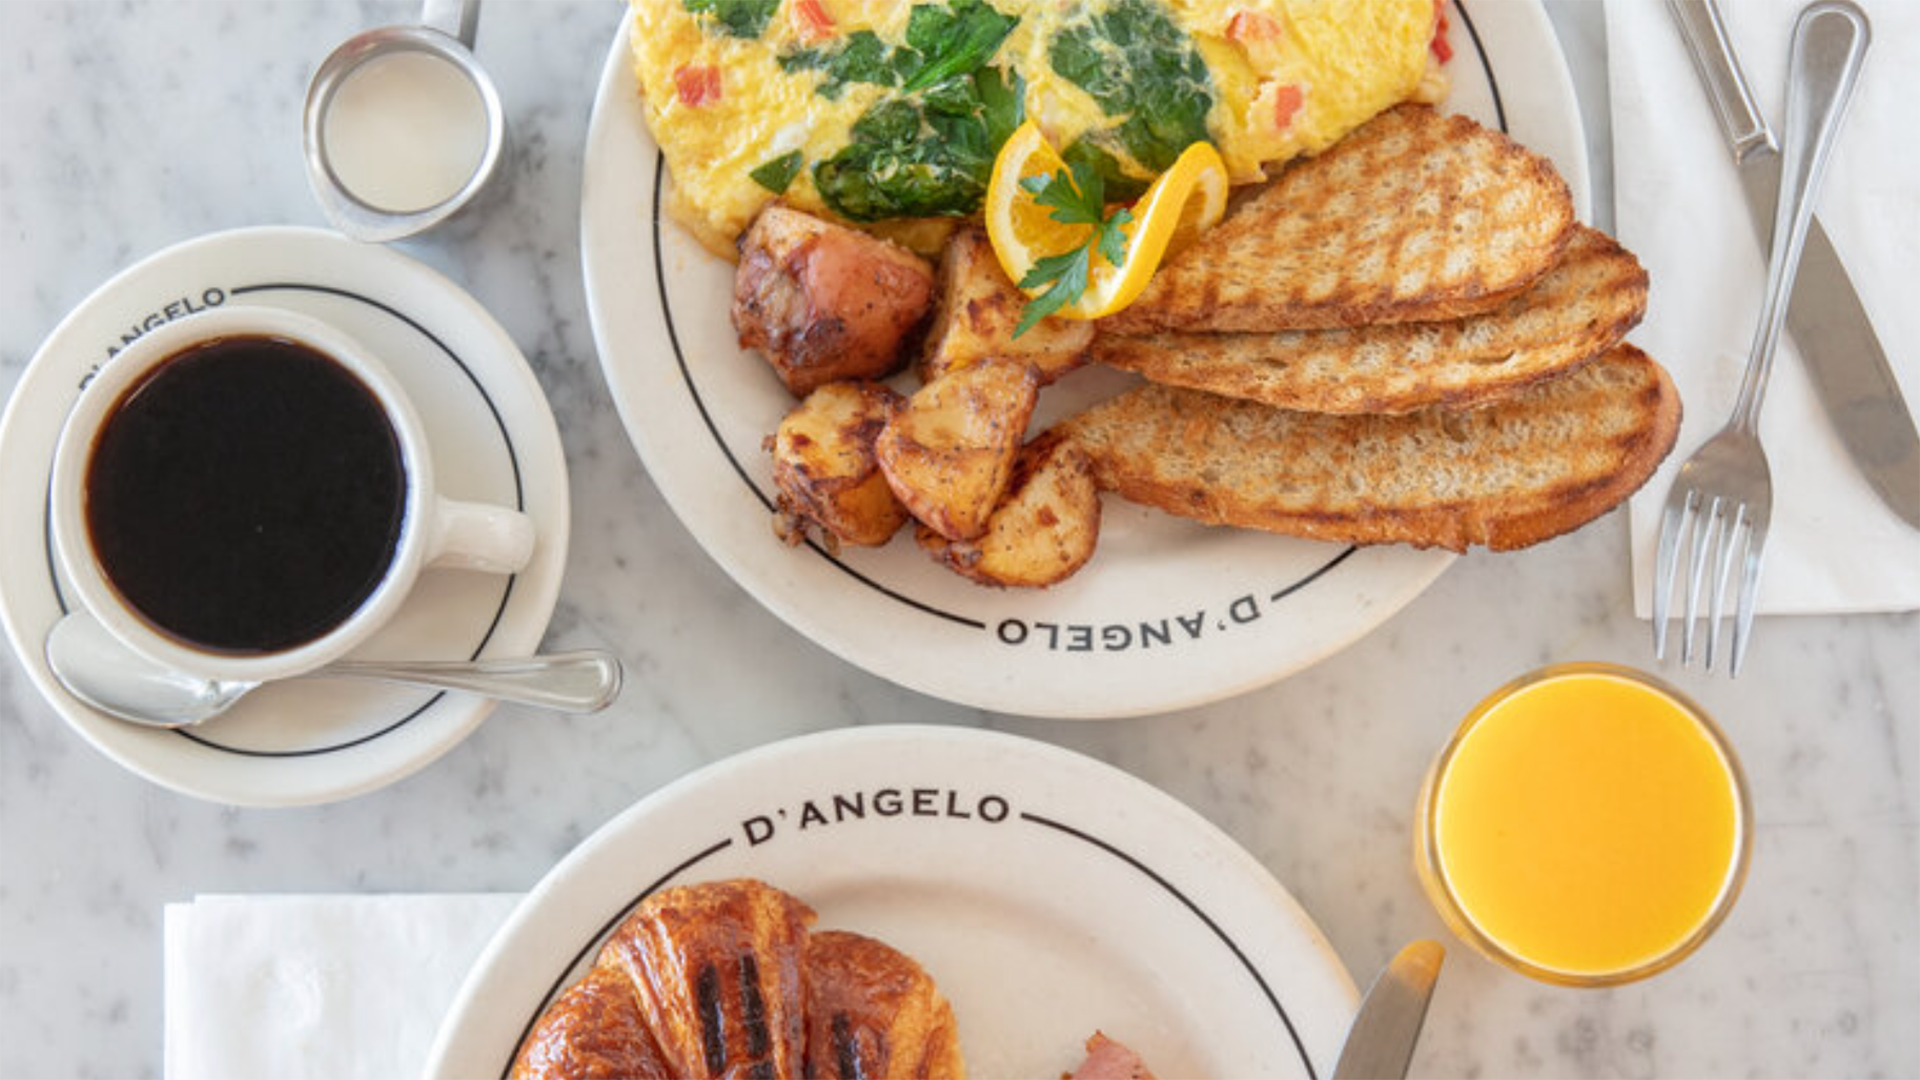 Eggs, toast, potatoes and coffee from D'Angelo Bakery's breakfast service